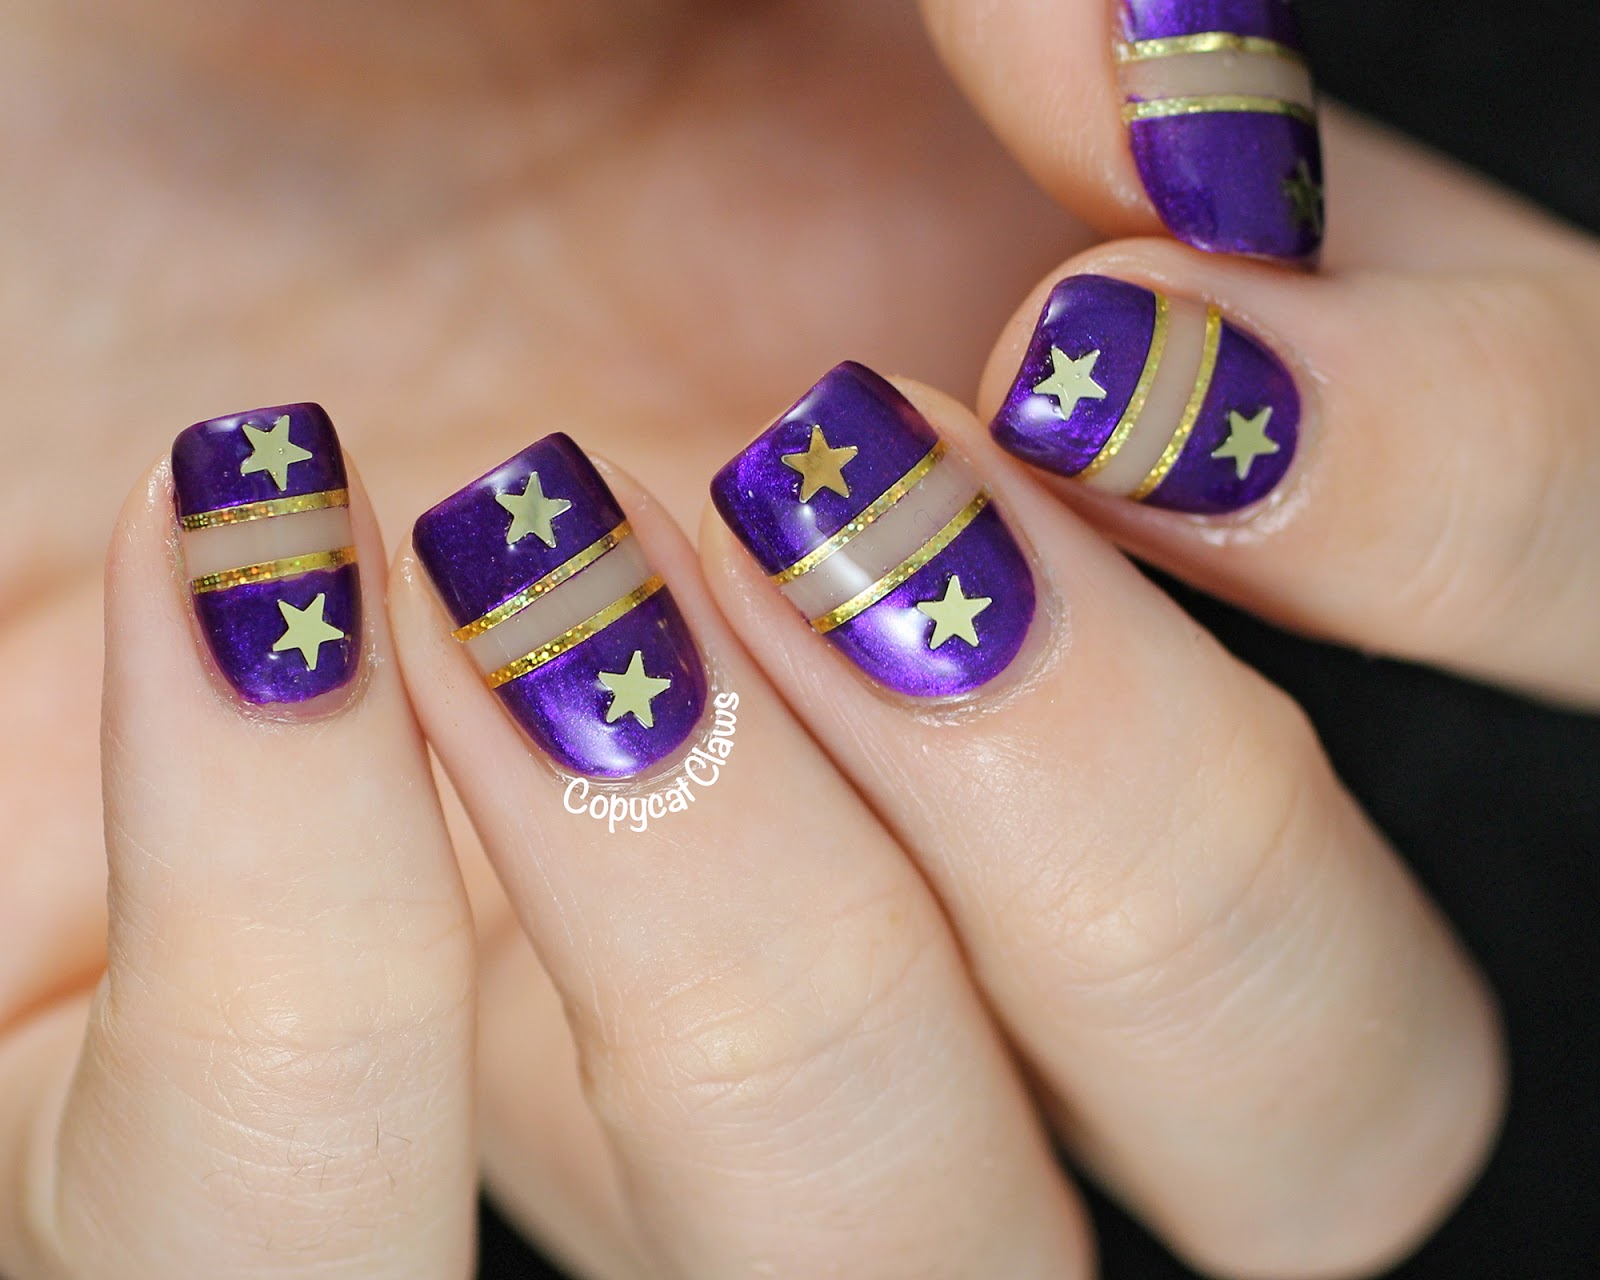 6. Triangle Nail Designs with Negative Space - wide 2